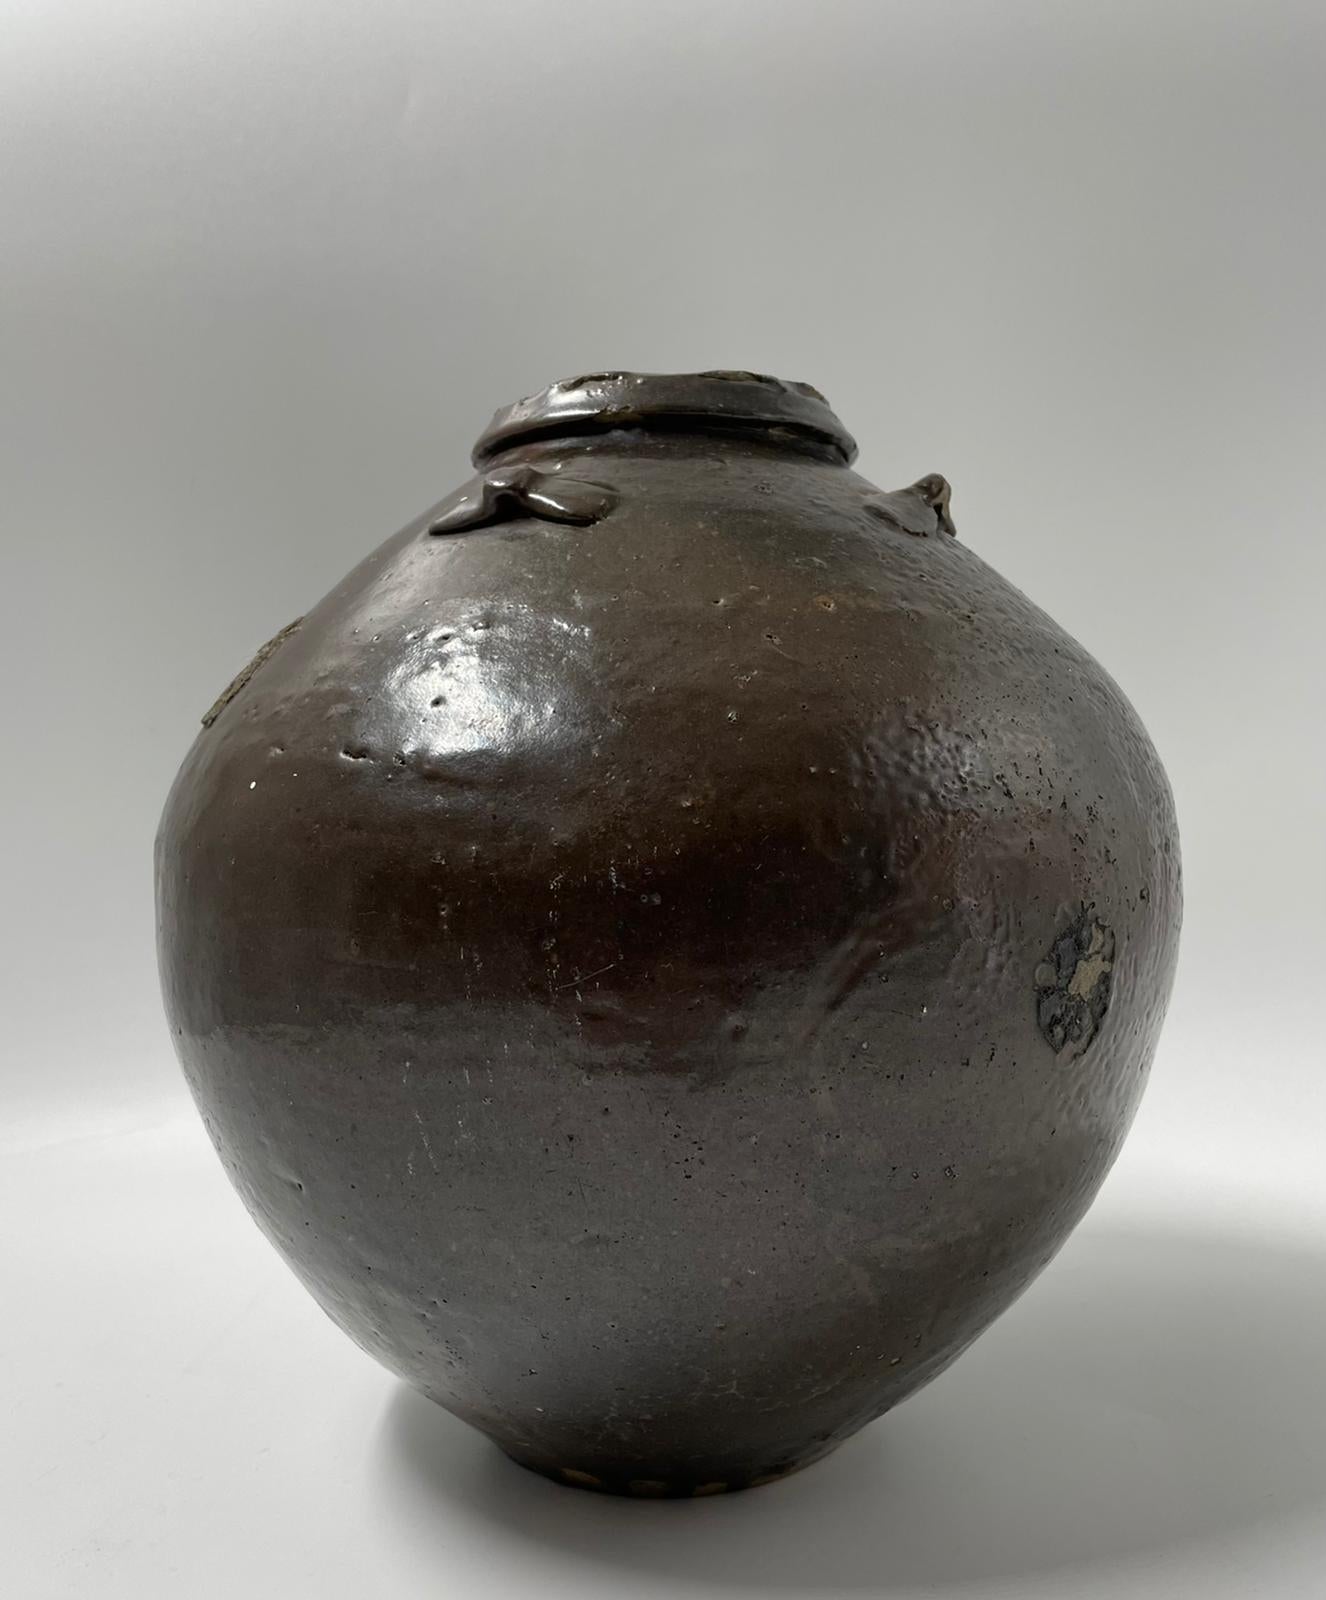  Chinese Ming Dynasty 1368 - 1644 Martaban Jar . Dates to the early Ming period .
High neck and wide shoulders , brown slip glaze , unglazed base , loop-handles. rolled lipped rim typical of Chinese ware .
Please see book 